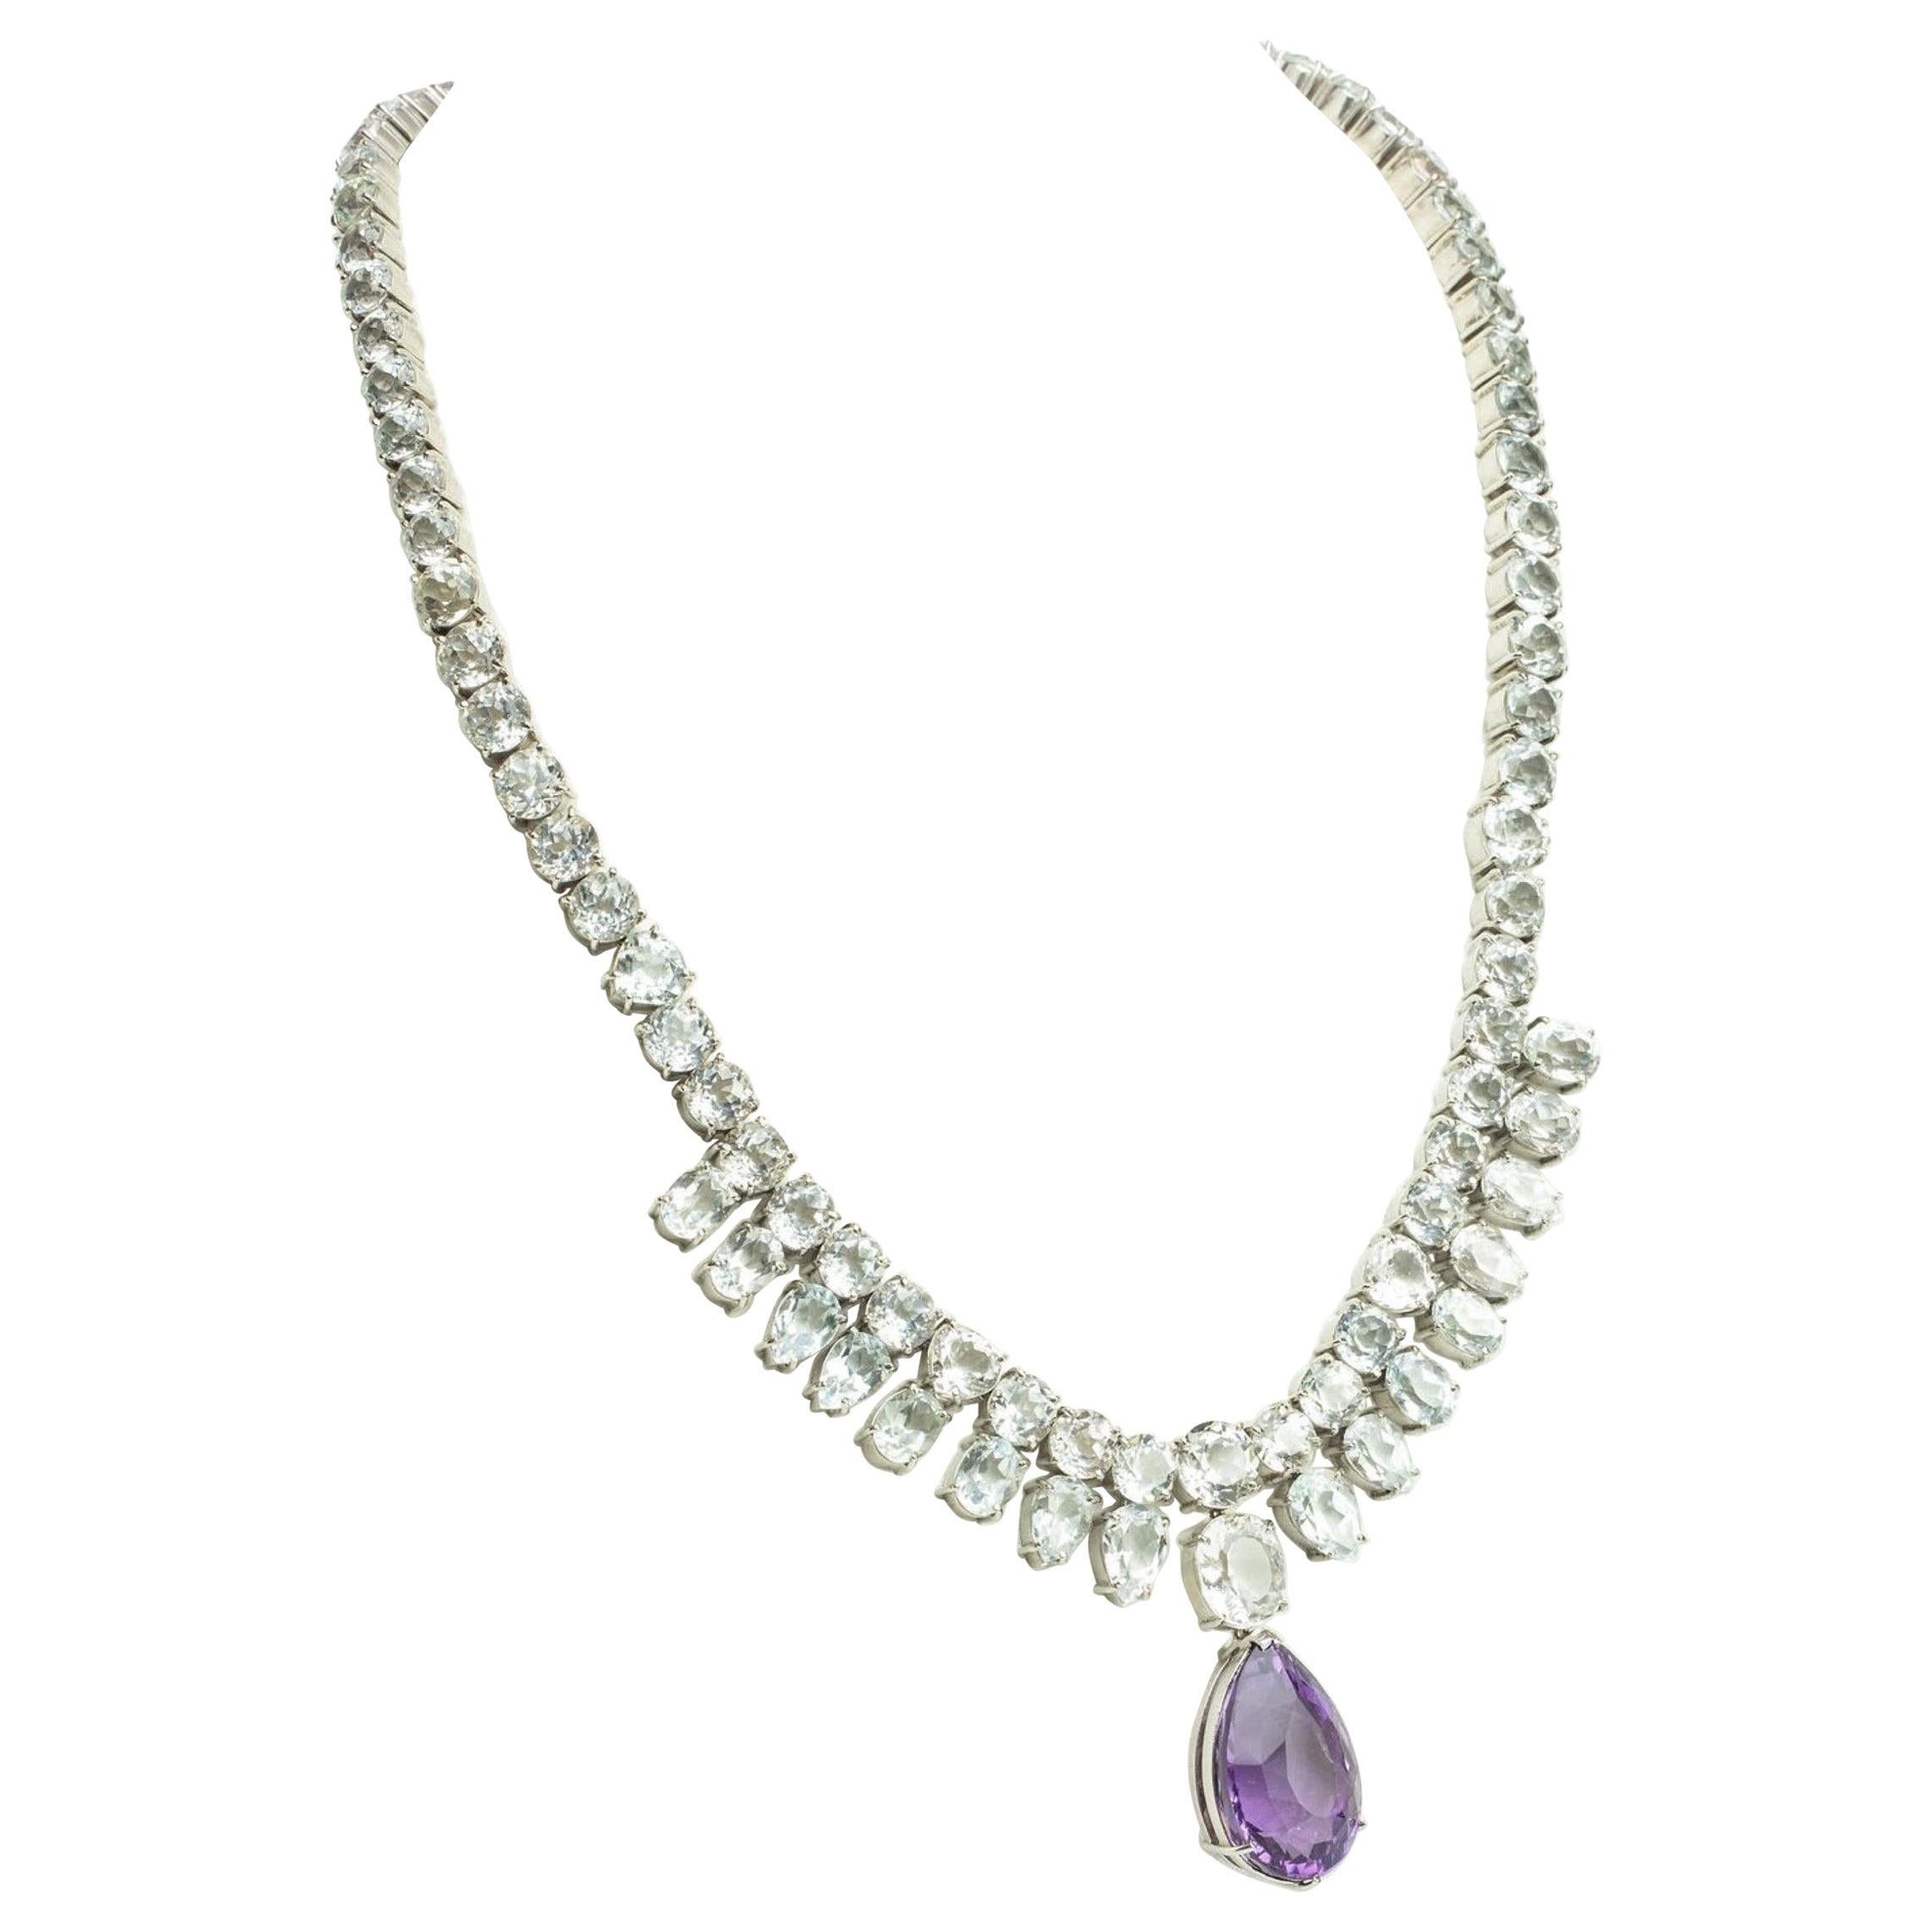 10ct Pear Cut Amethyst and Topaz Necklace